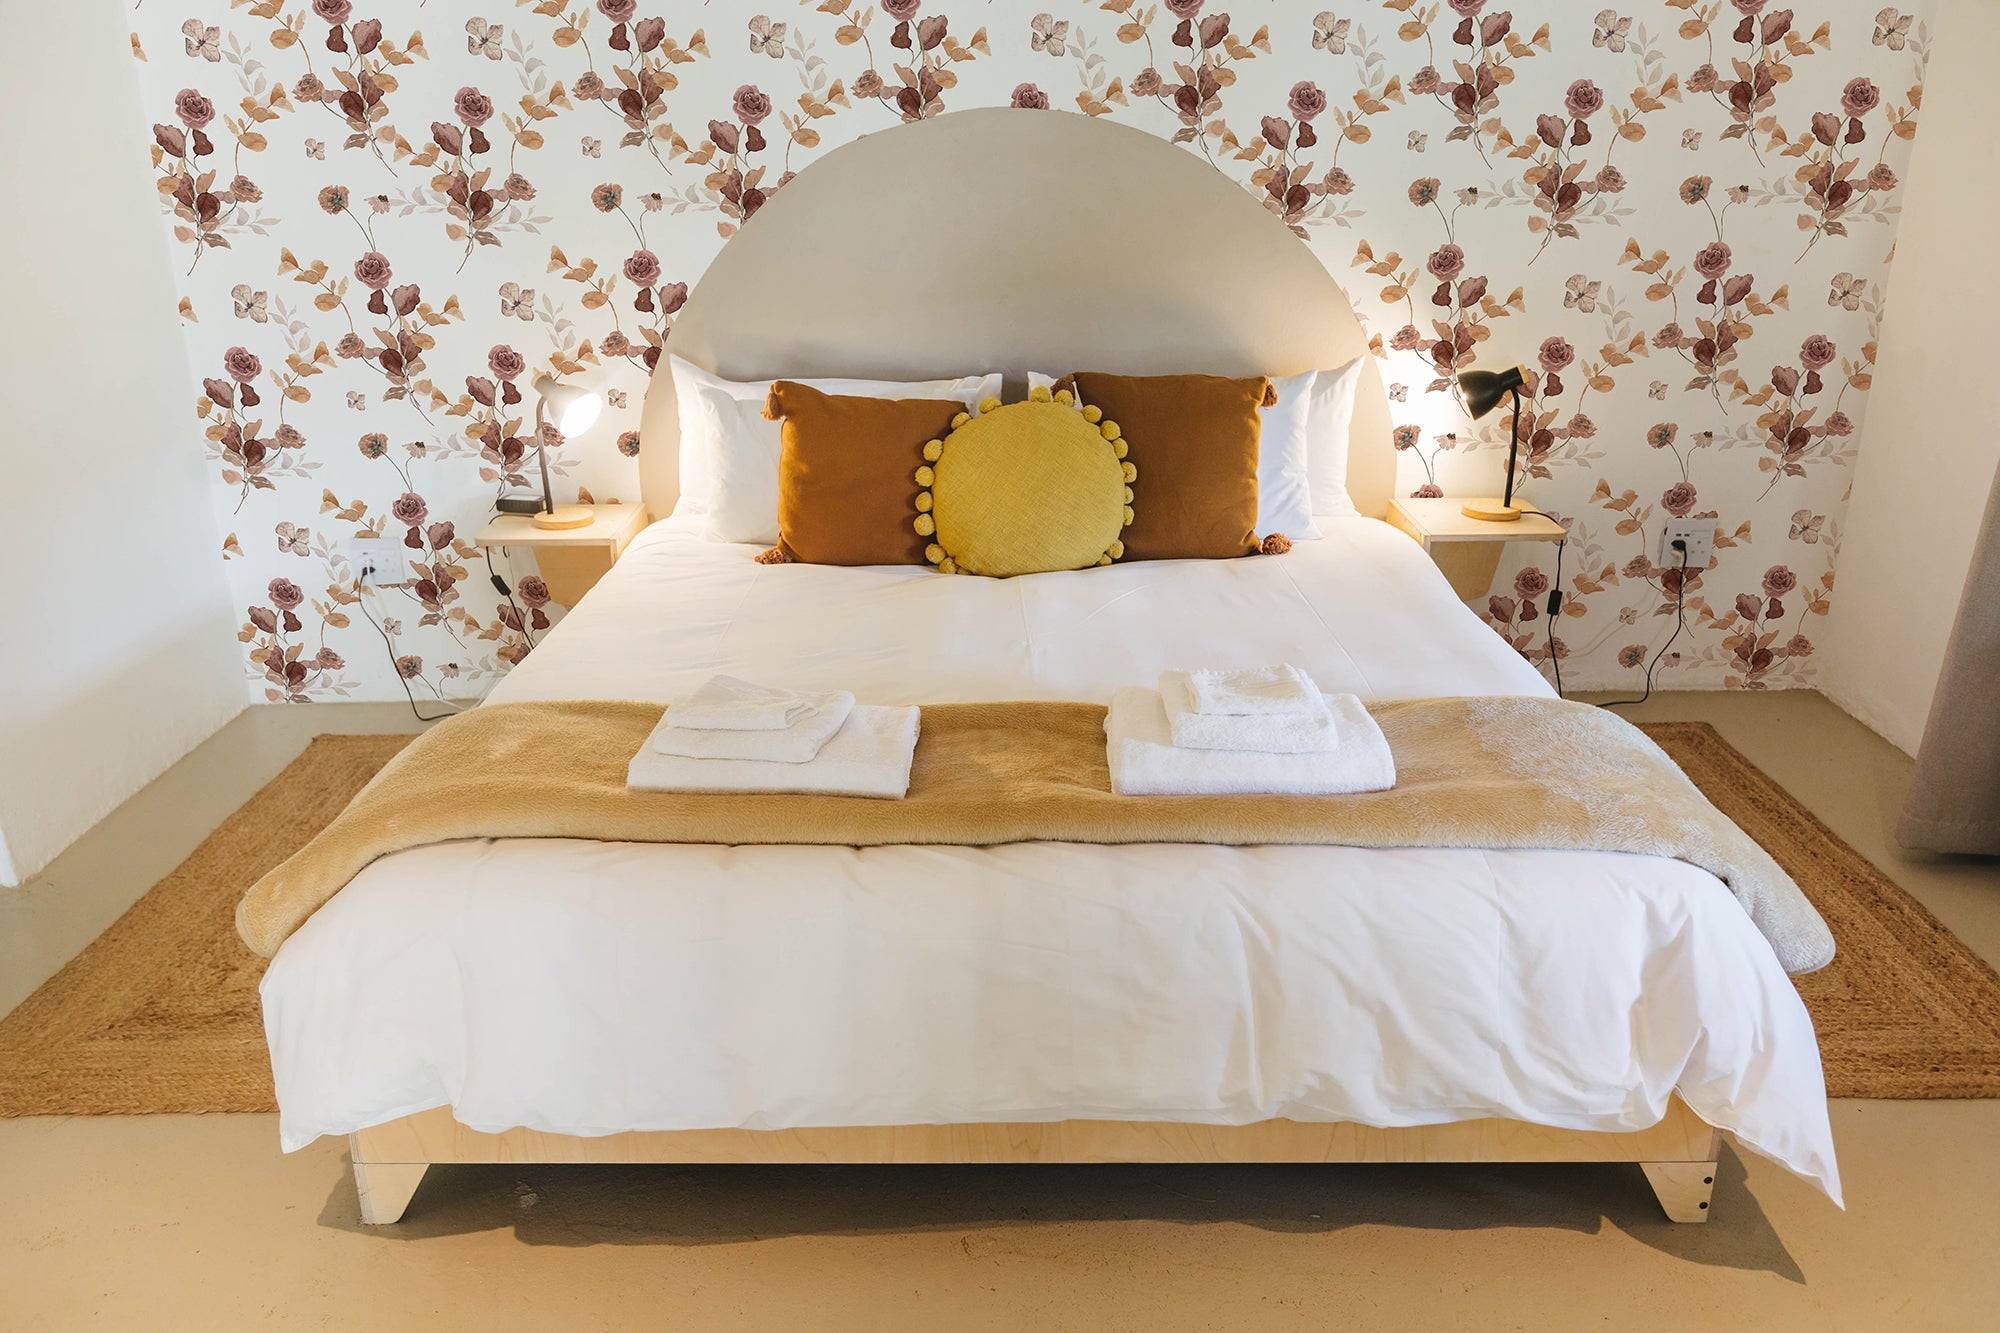 A bedroom elegantly decorated with Autumn Floral Wallpaper, featuring large floral prints in shades of rose and beige. The cozy setting includes a bed with white linens, mustard yellow pillows, and a round yellow cushion, creating a warm, inviting atmosphere.